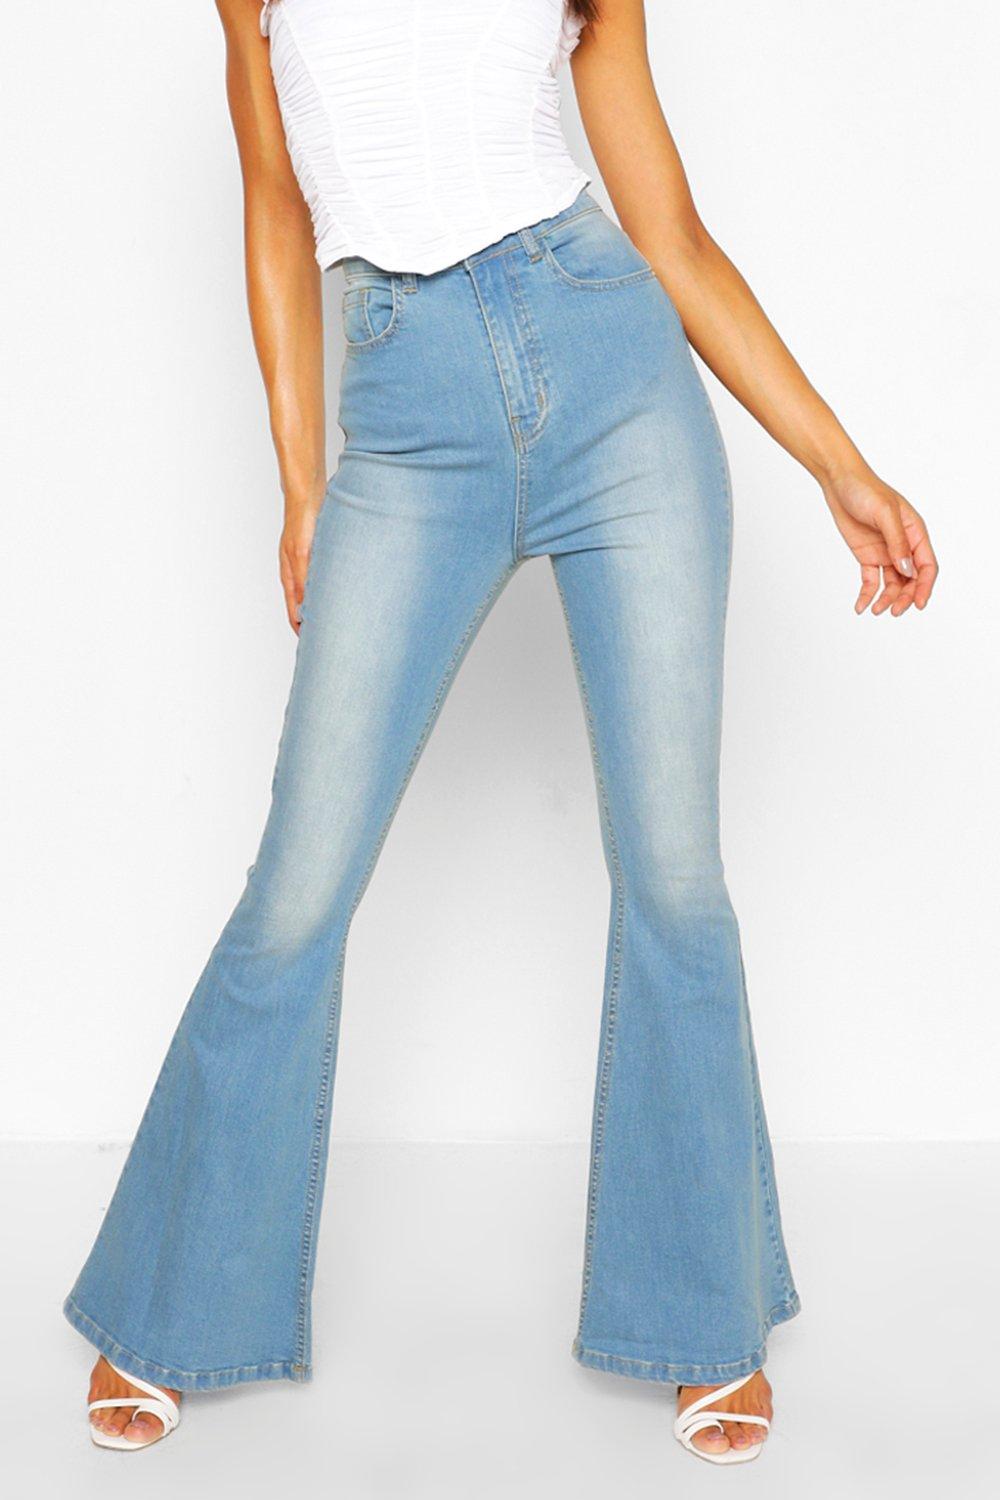 Flare For You Tall High Waisted Flared Leg Jeans in Light Blue Wash